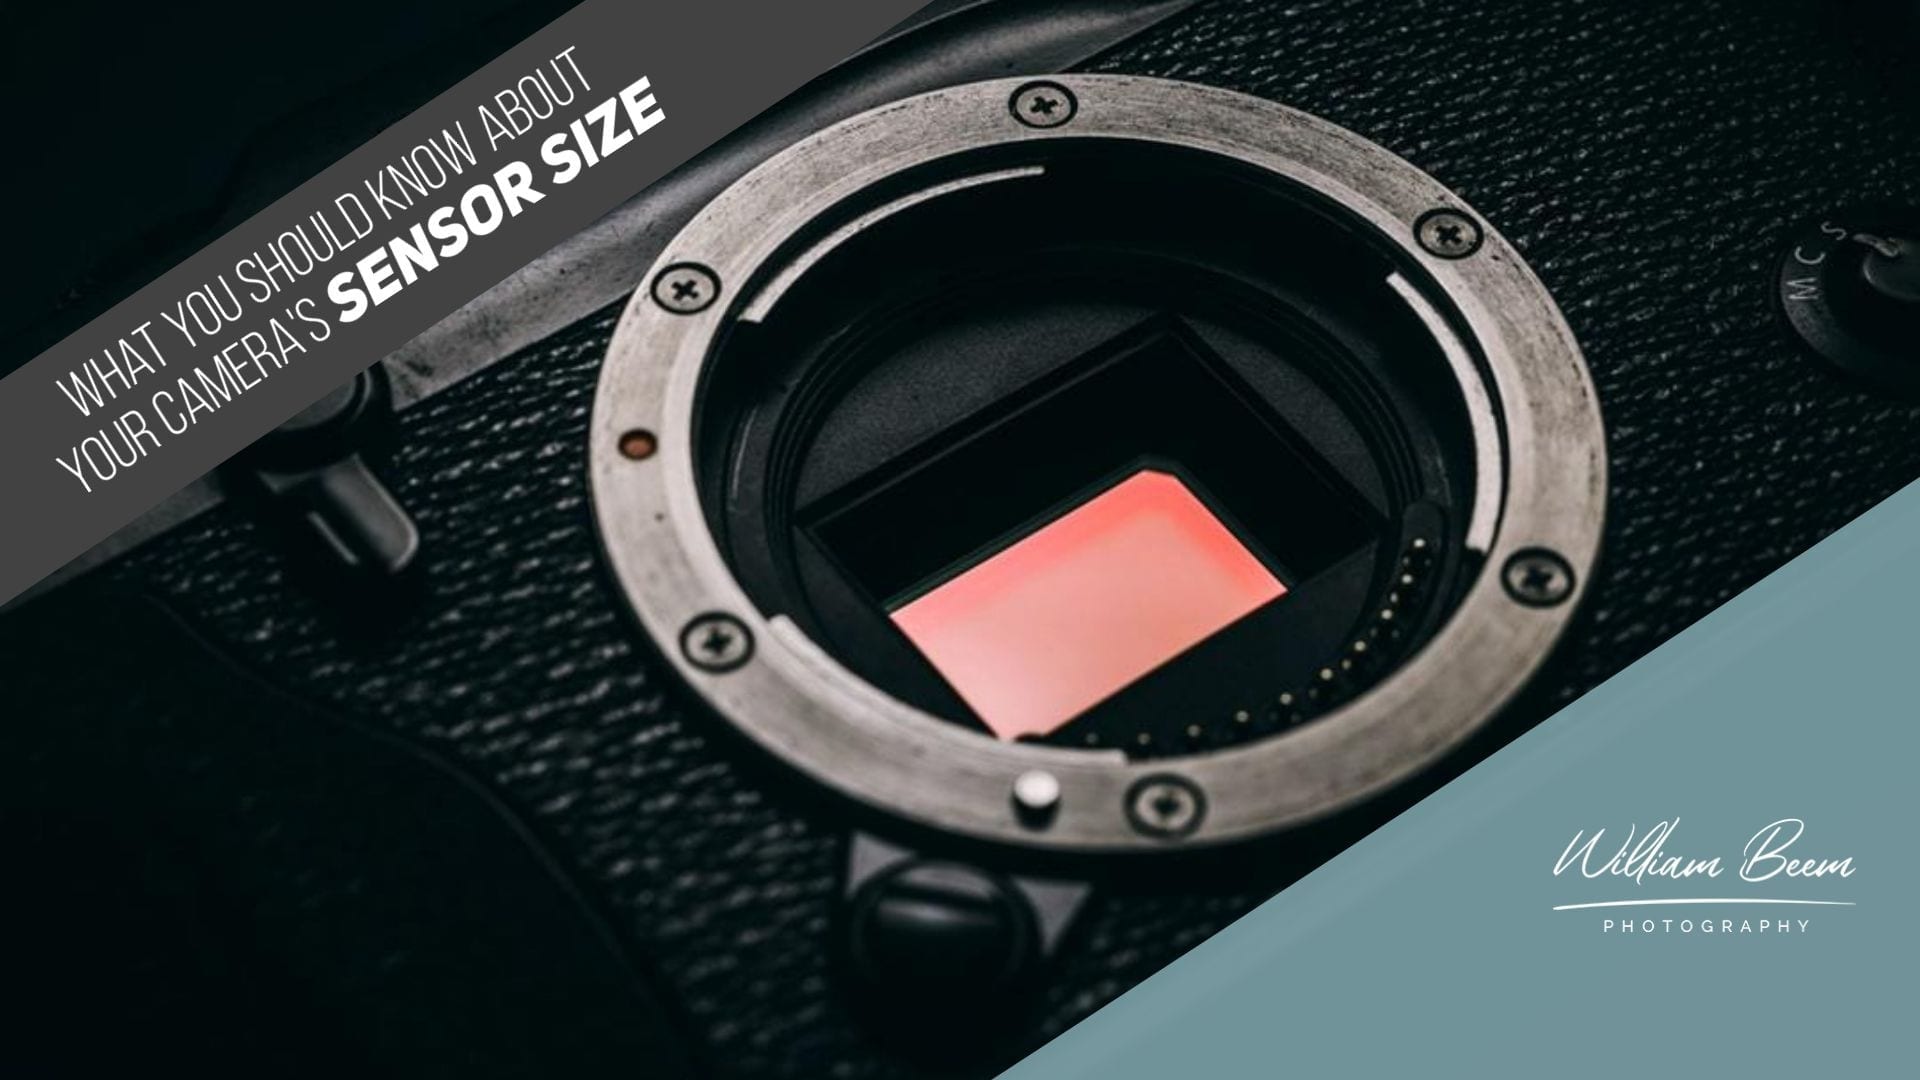 What You Should Know About Your Camera's Sensor Size